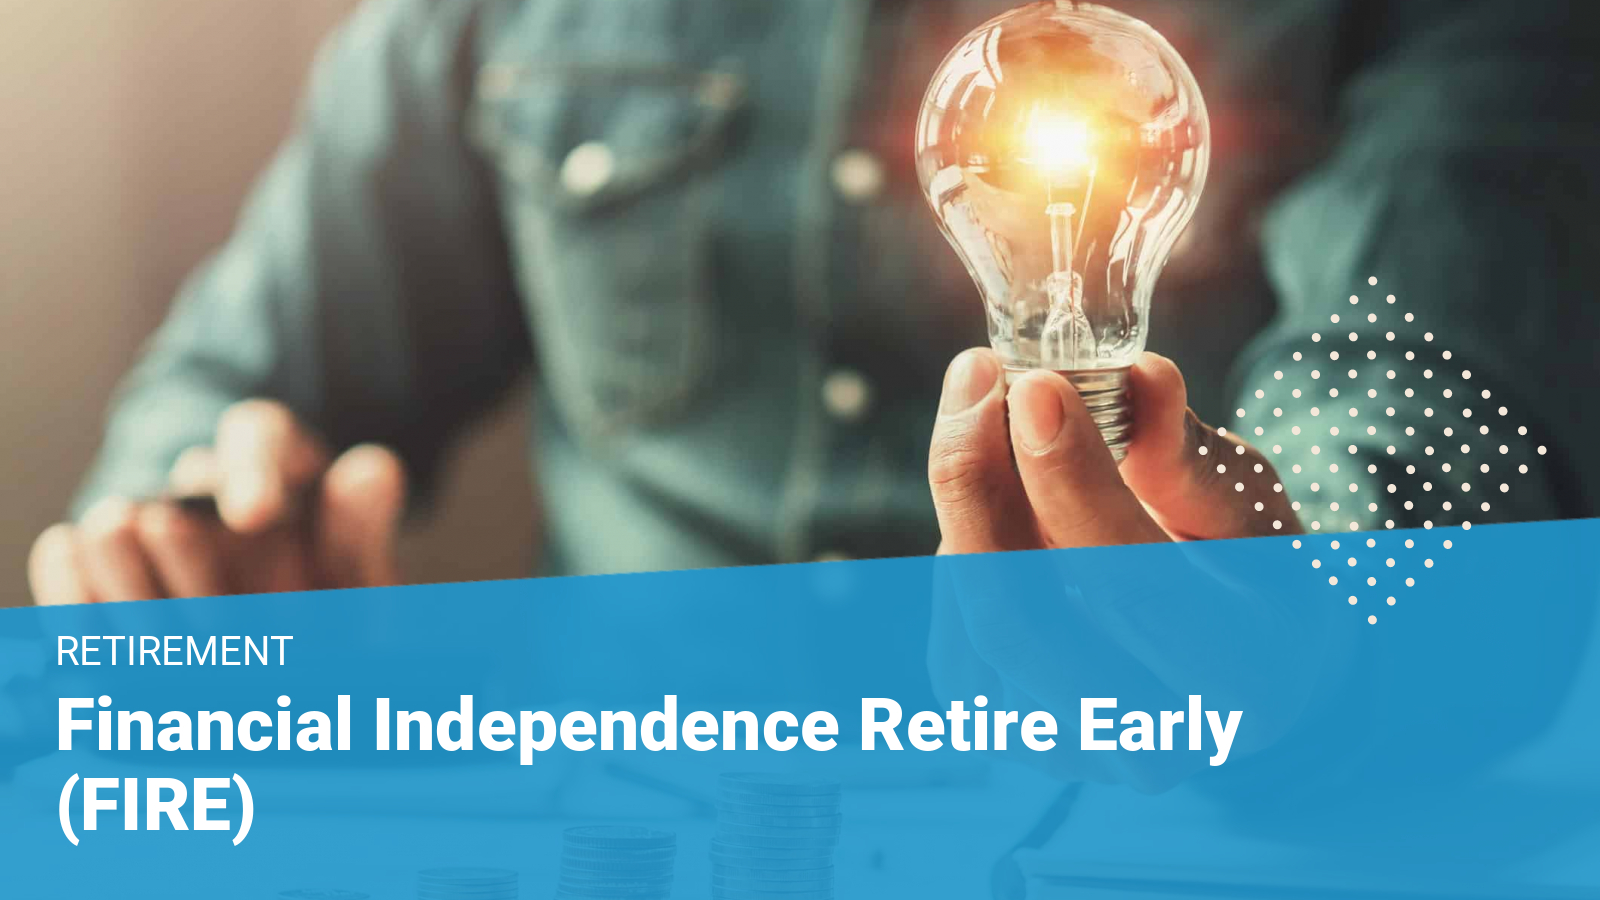 Financial Independence, Early Retirement, and the 4% Rule